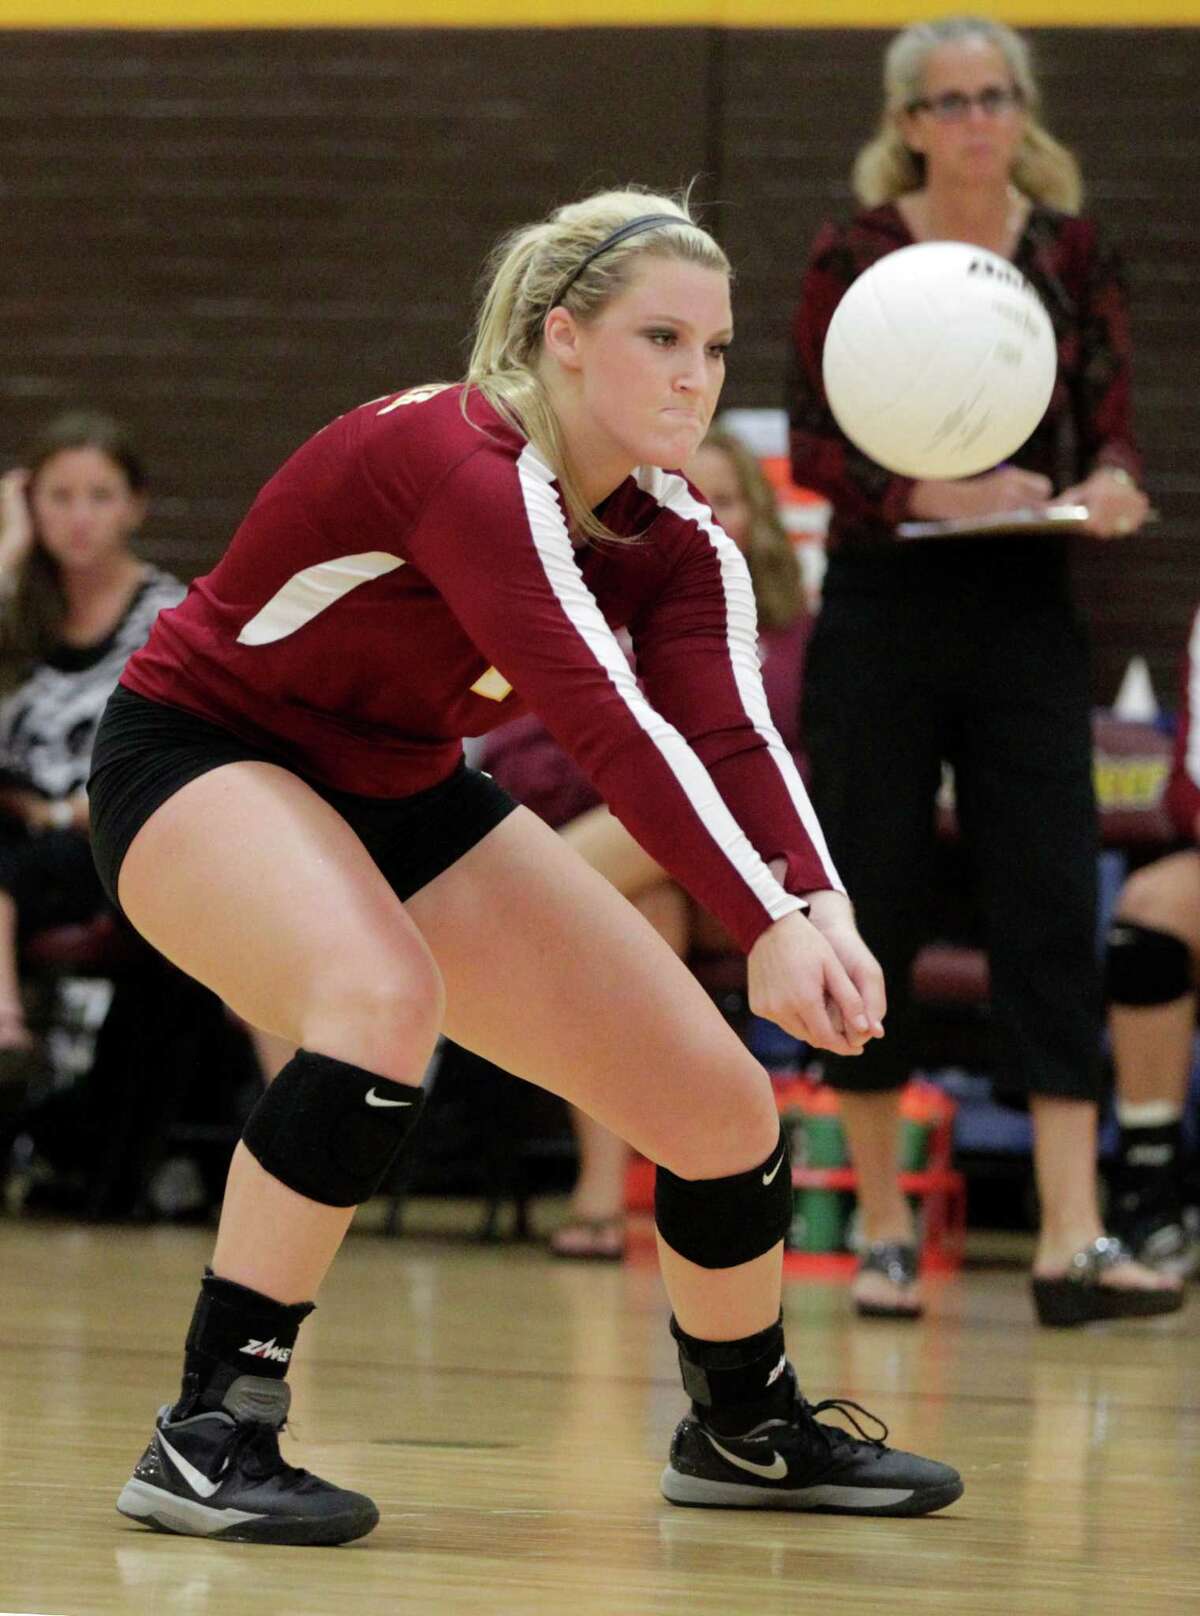 Deer Park's Maddie Wallace digs a ball during a high school volleyball game against Clear Falls on Tuesday, Aug. 12, 2014, in Deer Park.